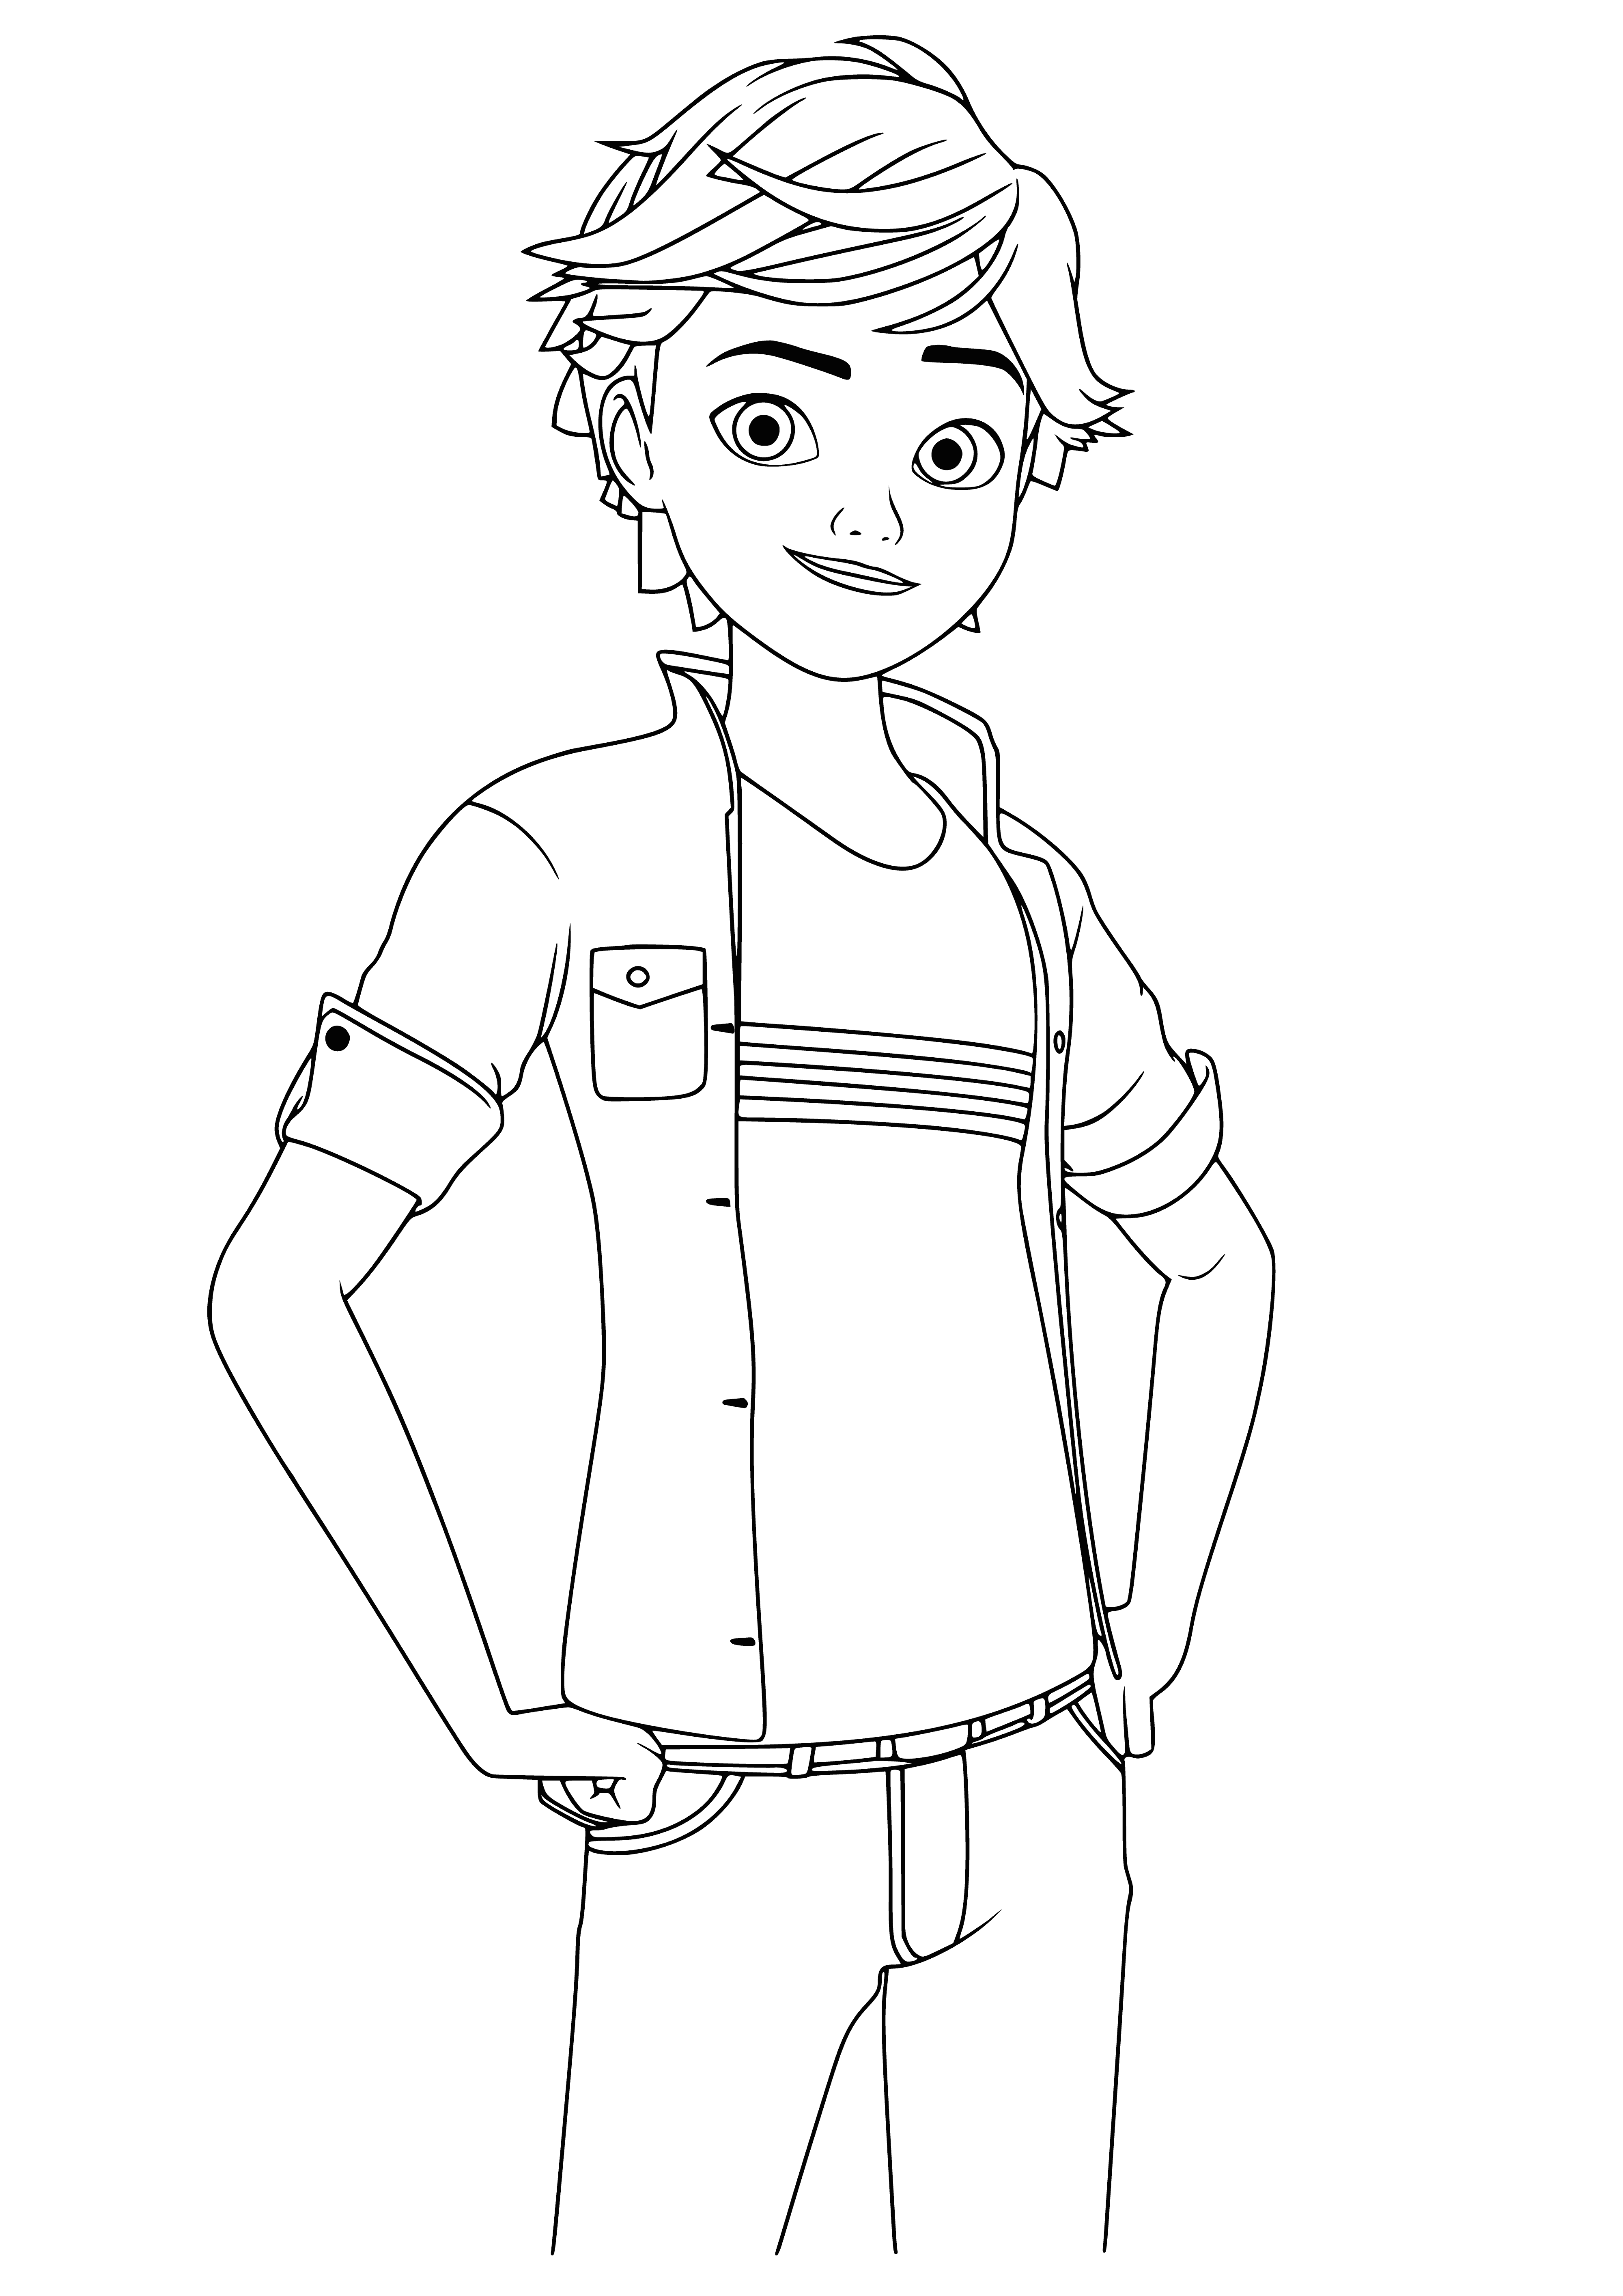 coloring page: Teenage Adrien is entranced by the mysterious Ladybug, but his father's overprotective nature and fear of abandonment often gets in the way.